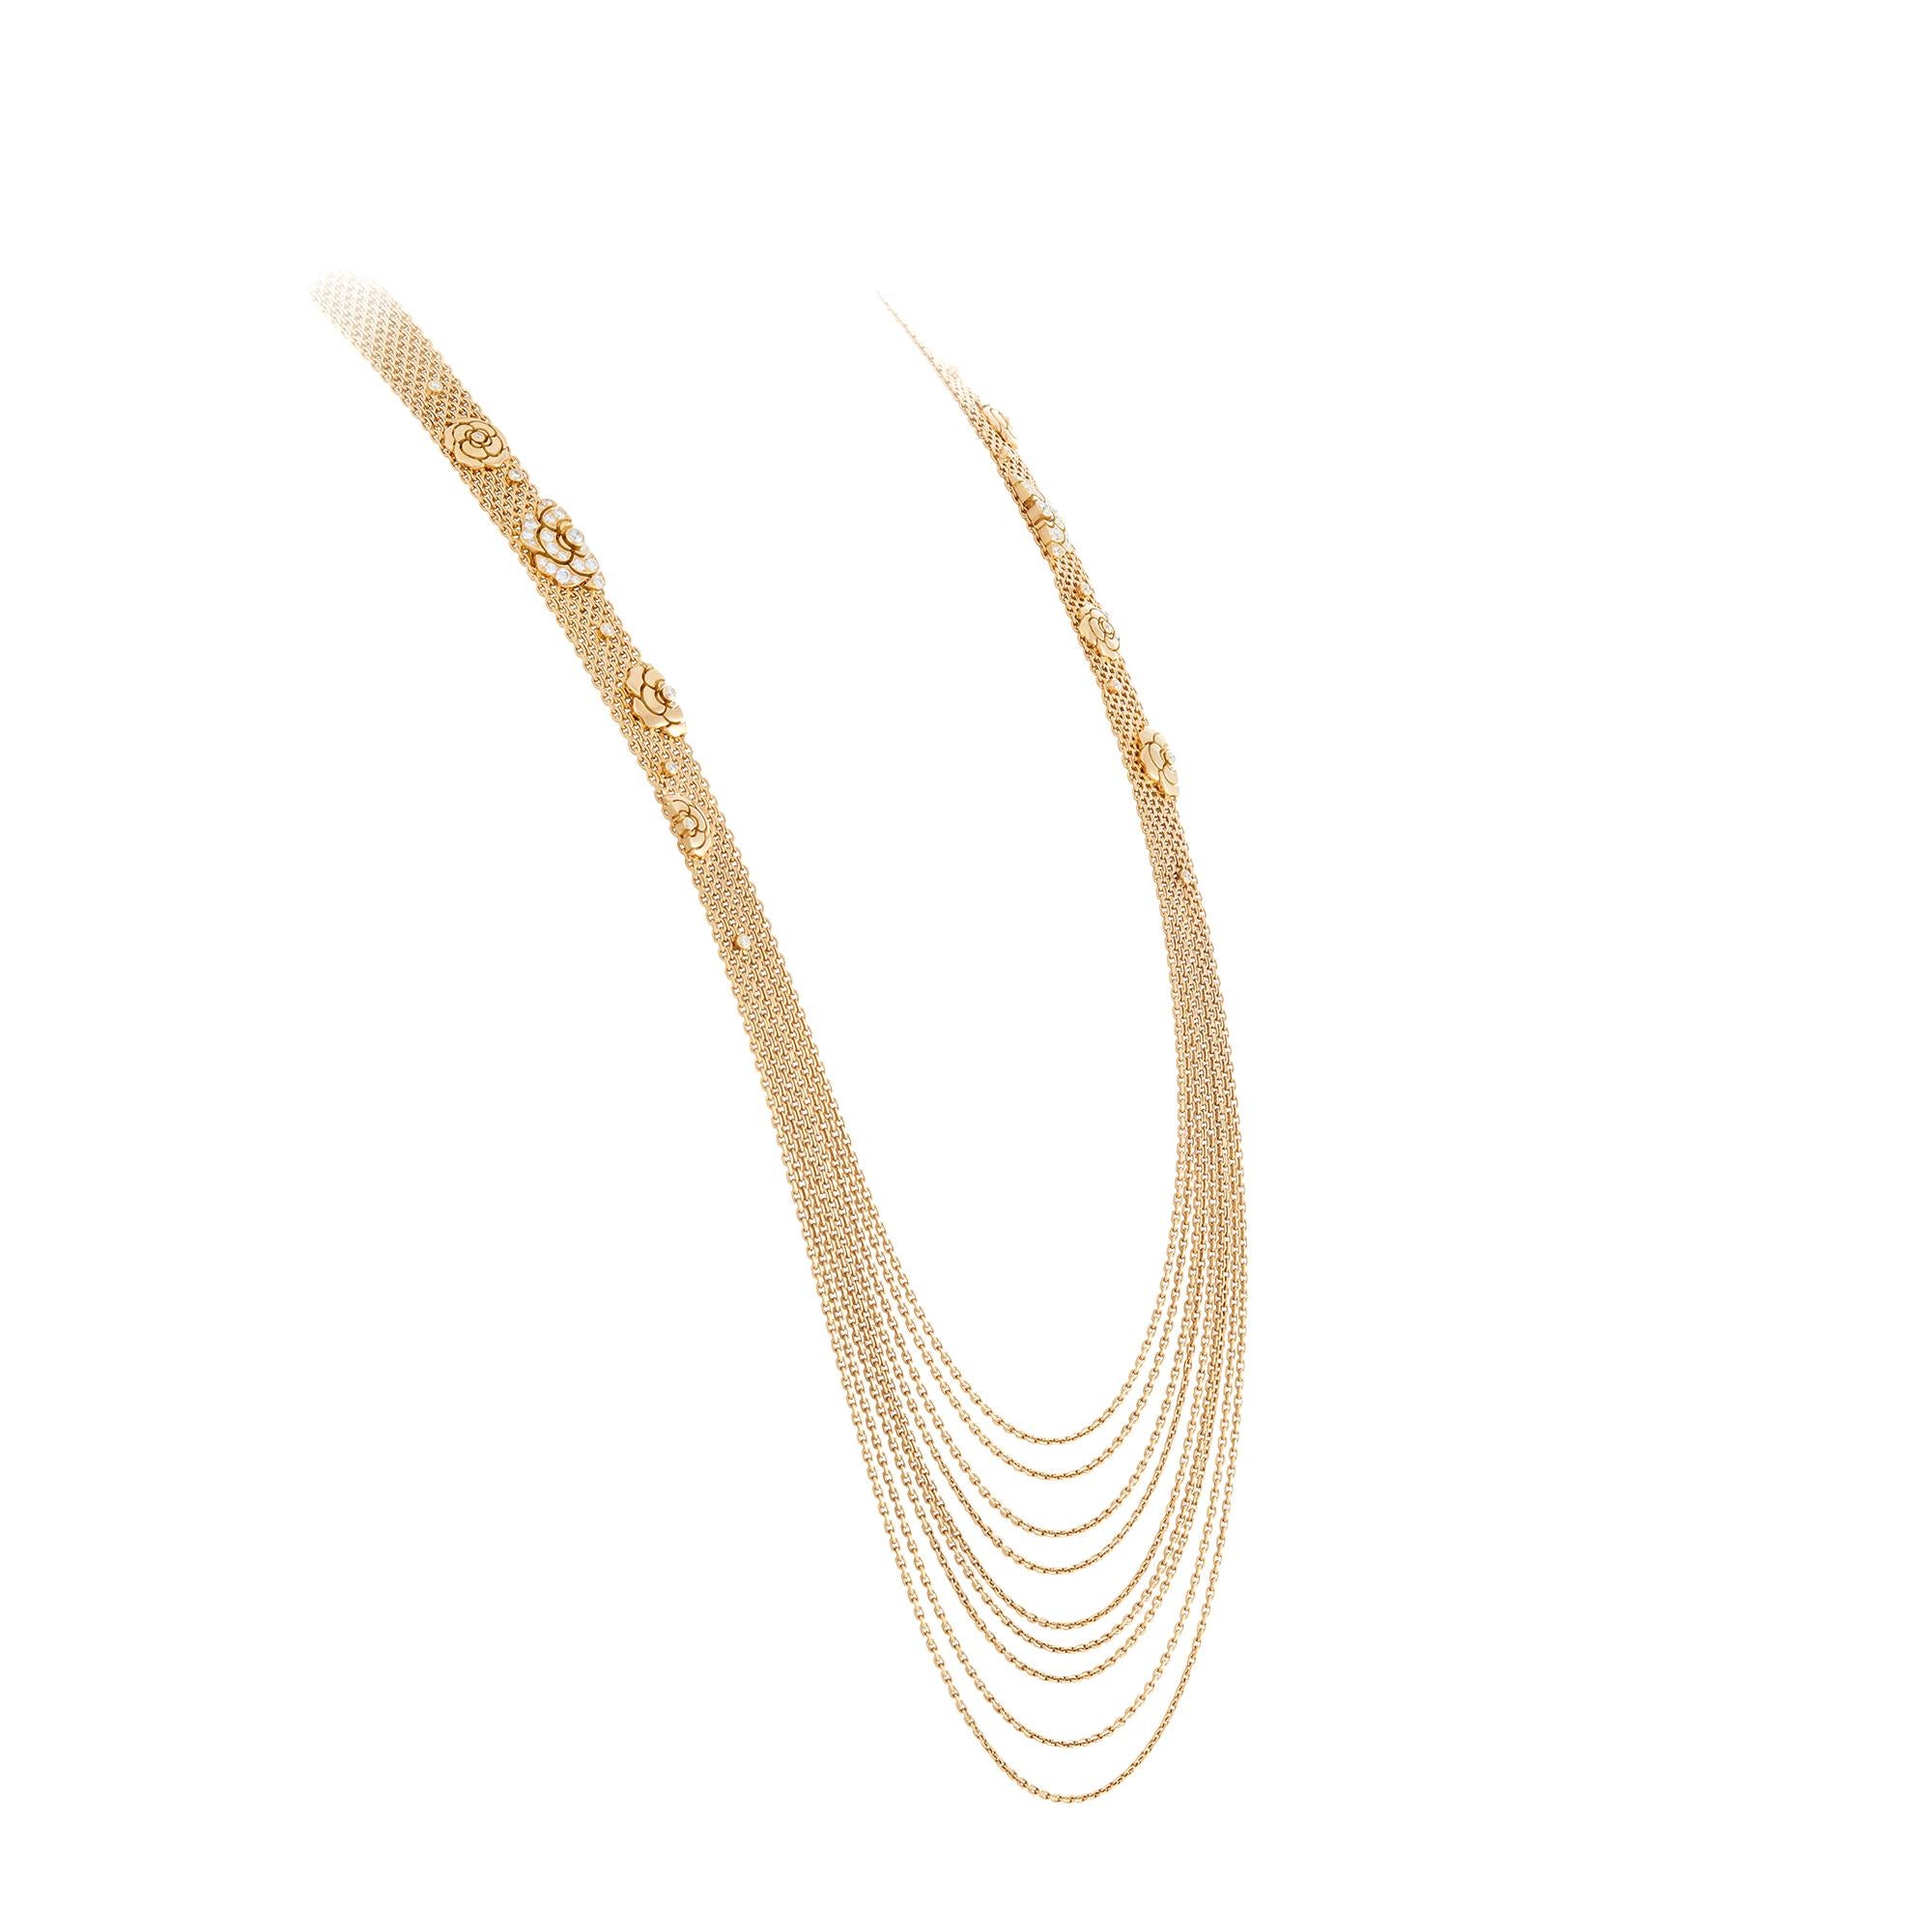 Authentic Chanel necklace crafted in 18k yellow gold.  The long flapper style necklace is comprised of several fine chains that are connected at the top and hang loosely at the bottom of the necklace creating a stunning fringed effect.  Chanel's